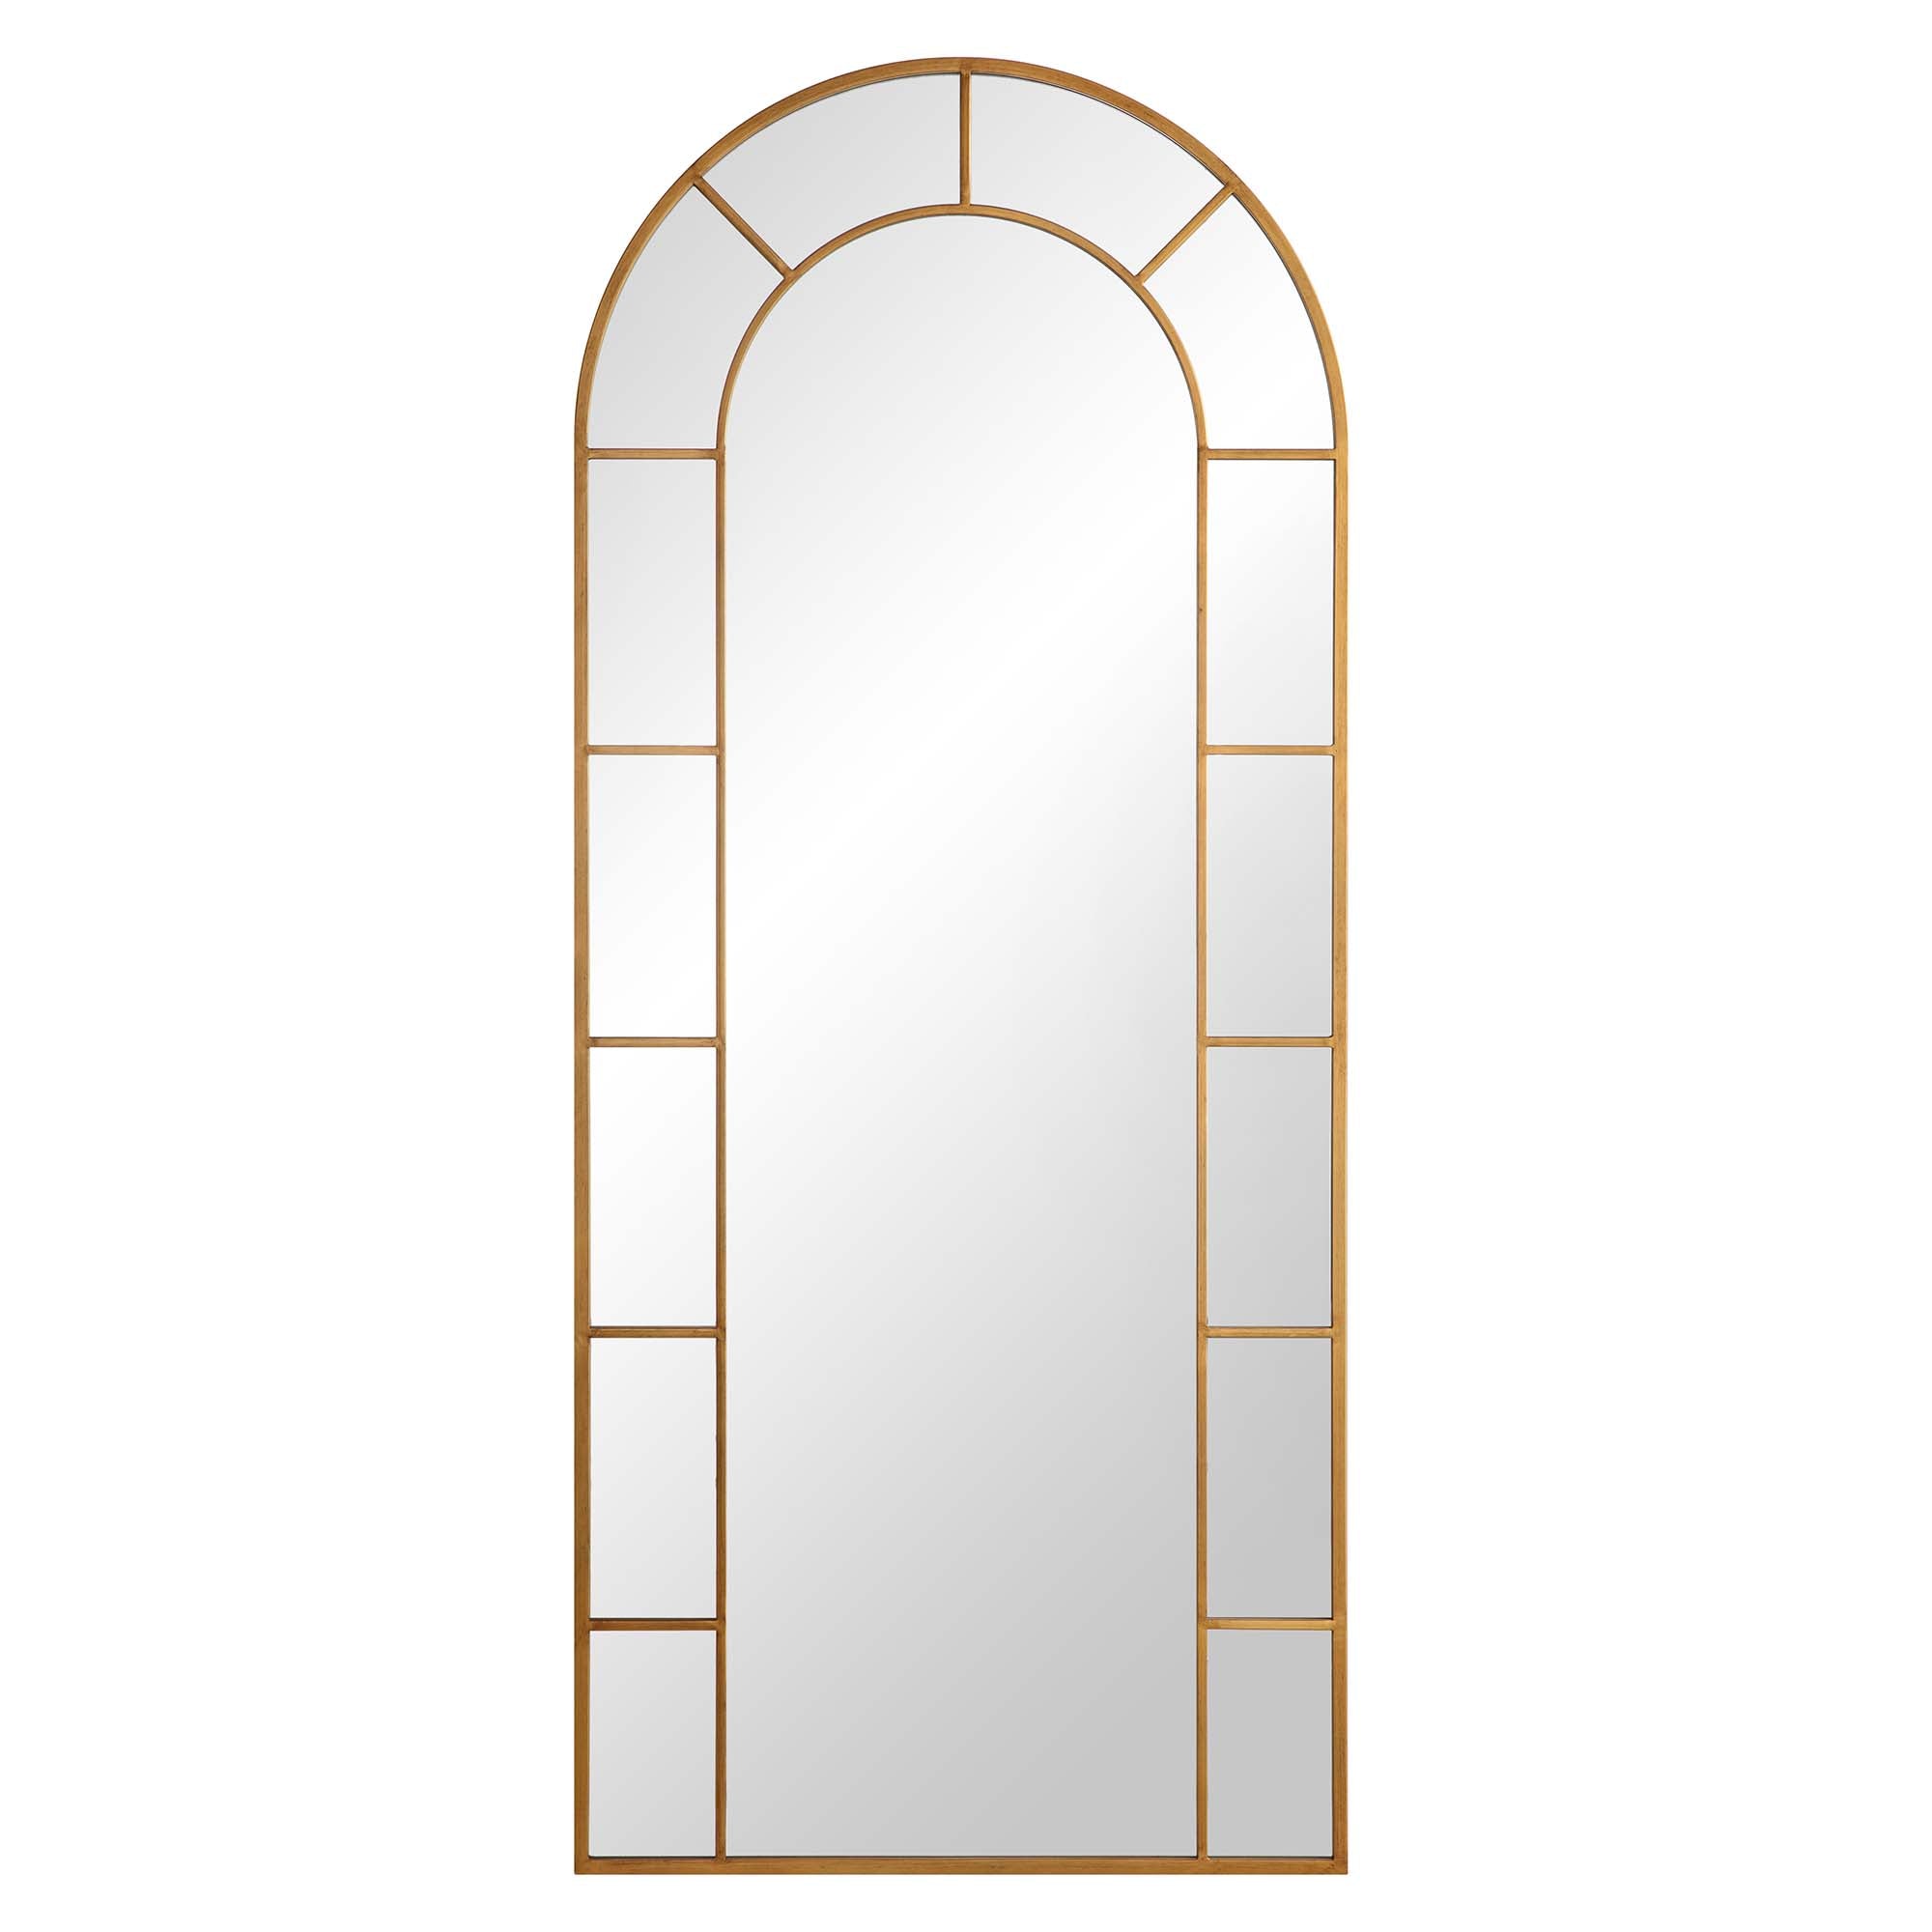 Beaumont Arched Full Lenth Metal Frame Mirror 178 x 76 cm, Antique Gold Effect